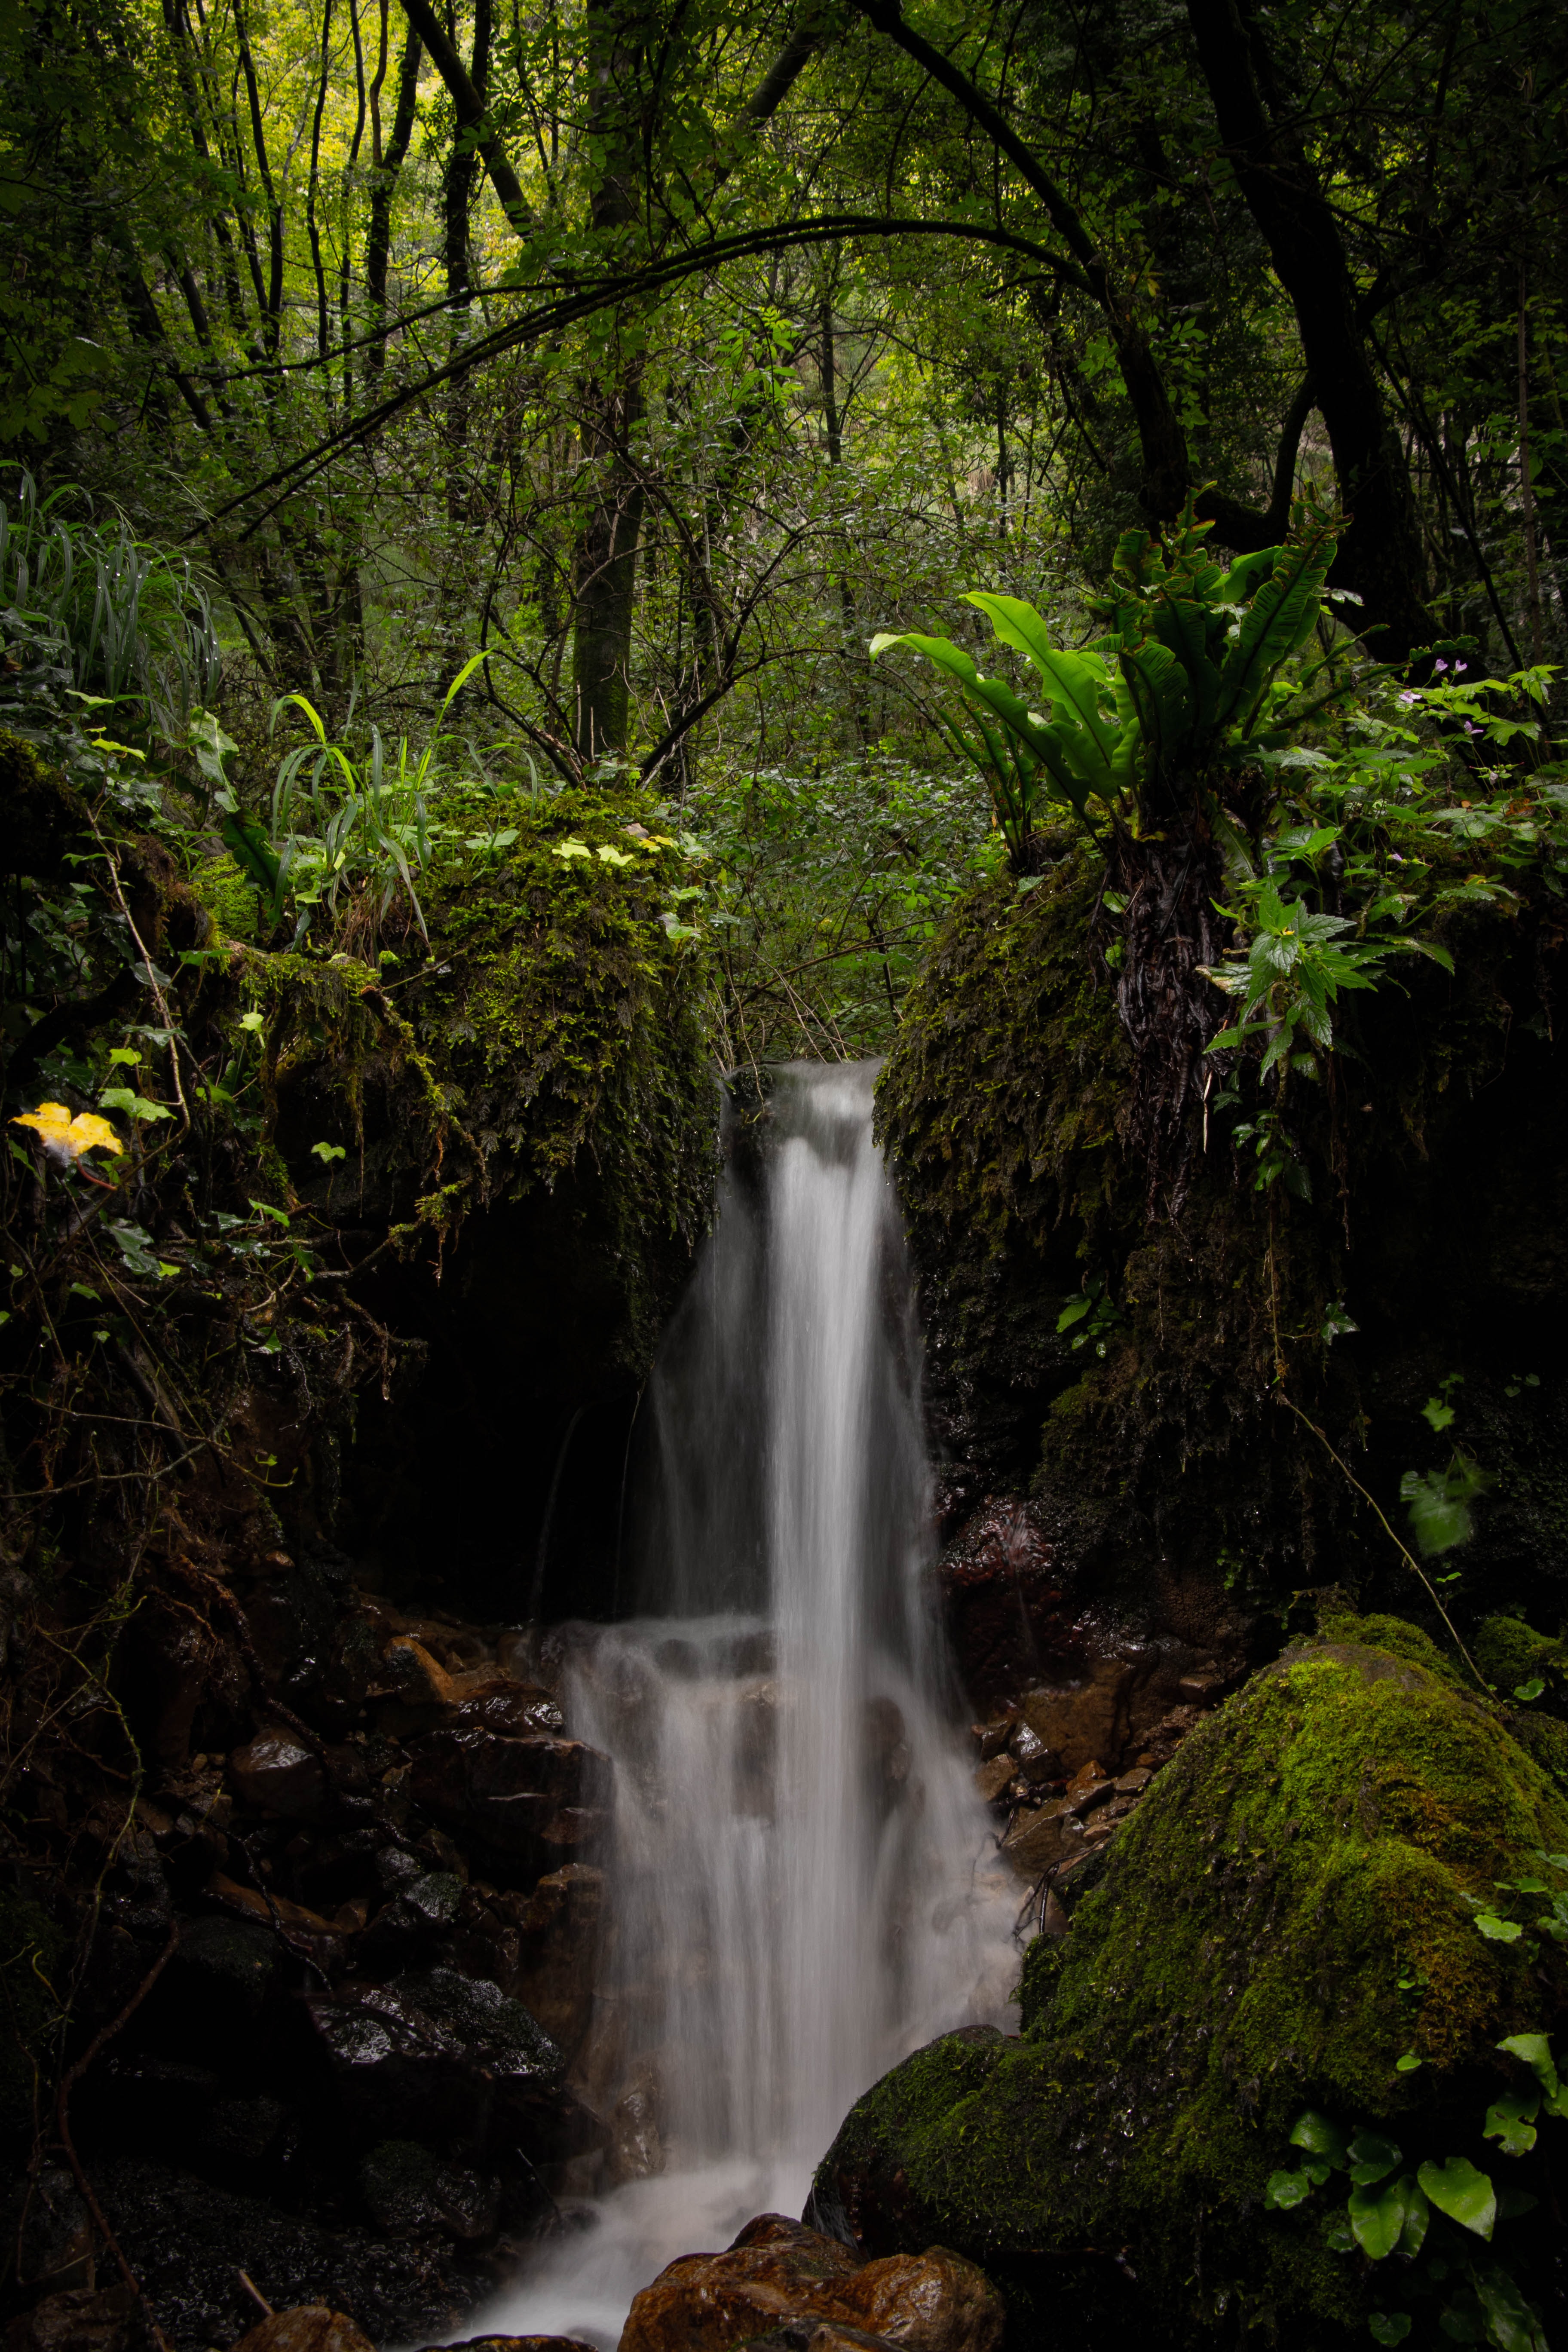 A waterfall in an impenetrable jungle.